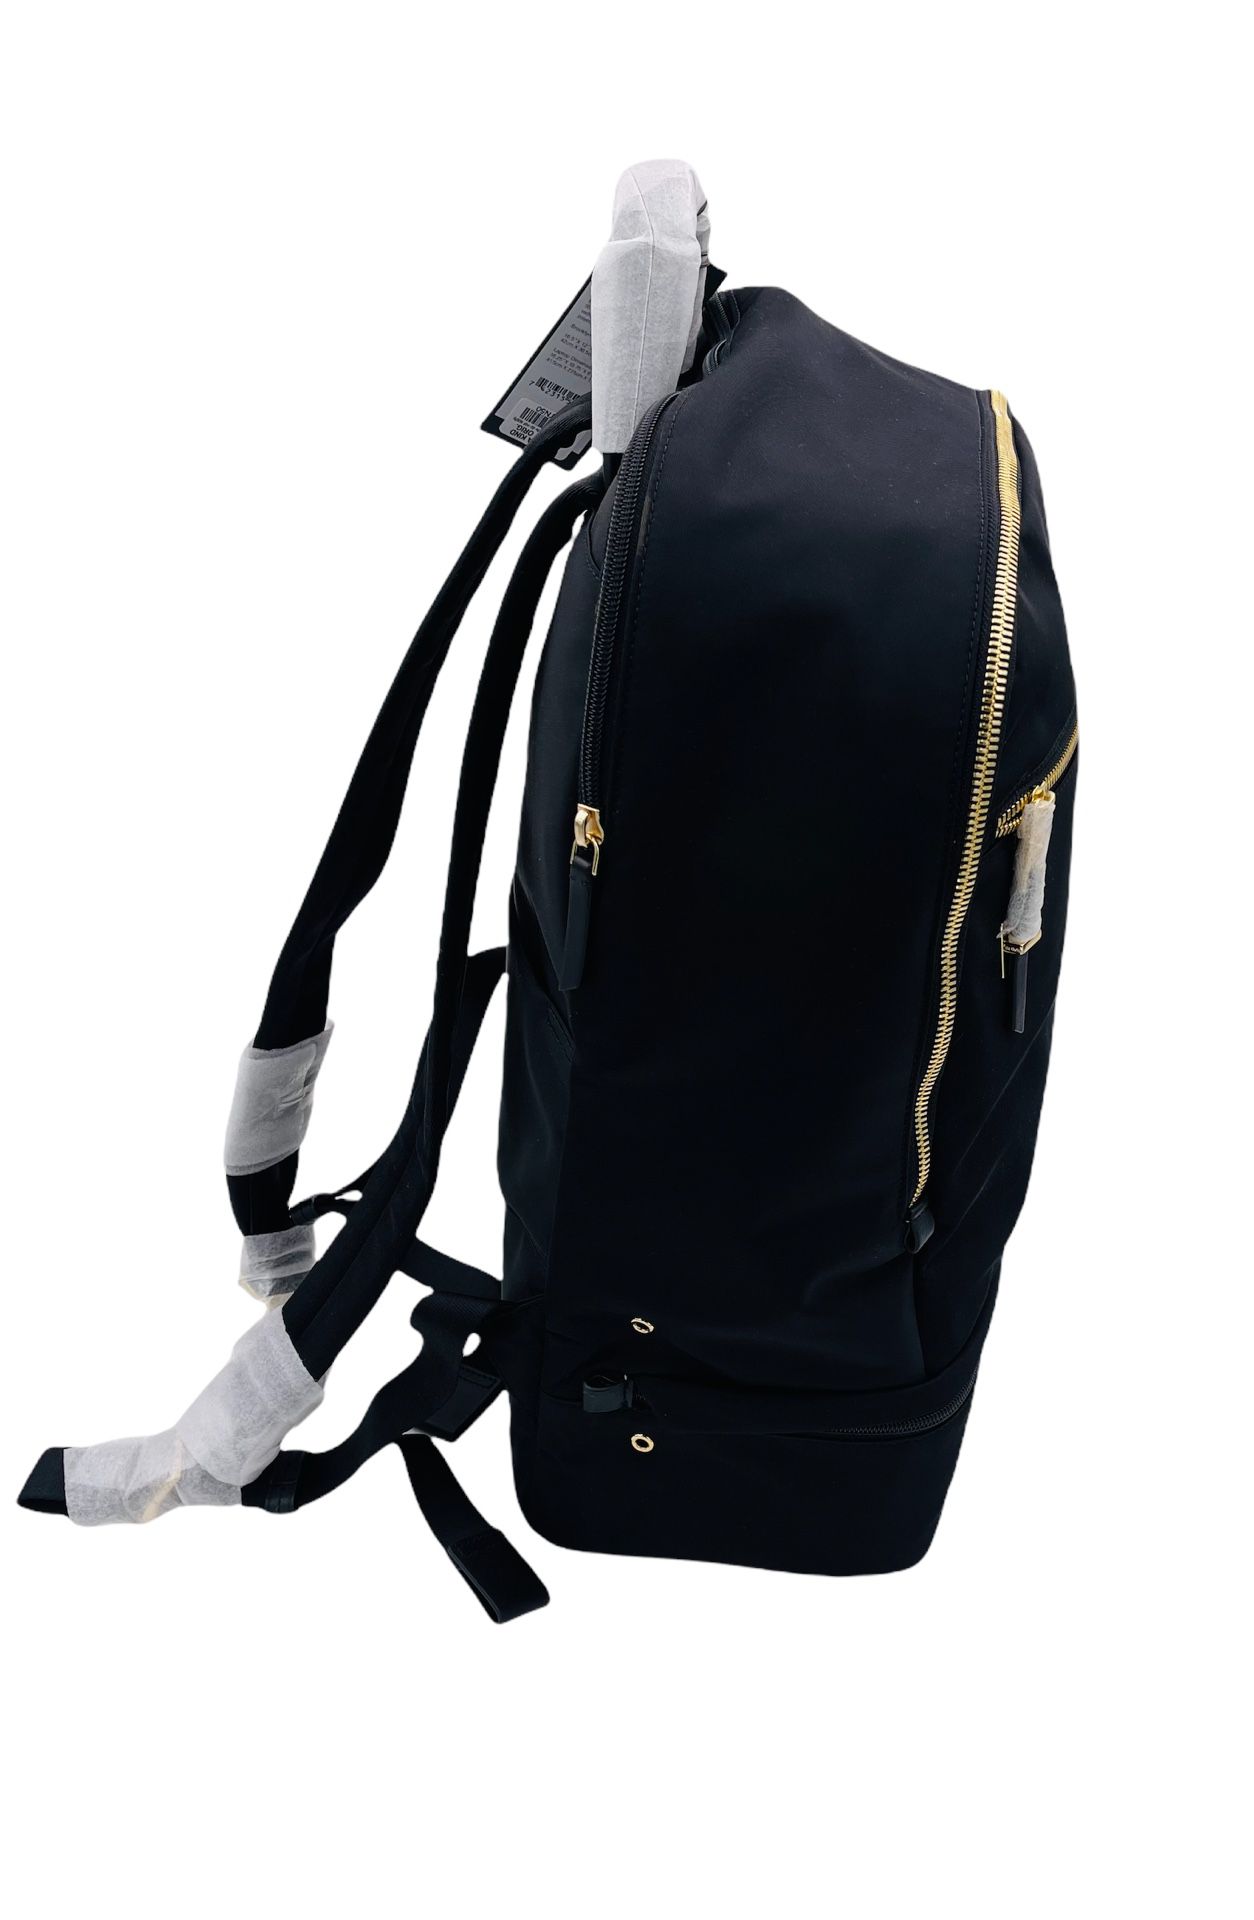 TUMI Brooklyn Double Compartment Backpack Black with Gold Hardware Voyageur